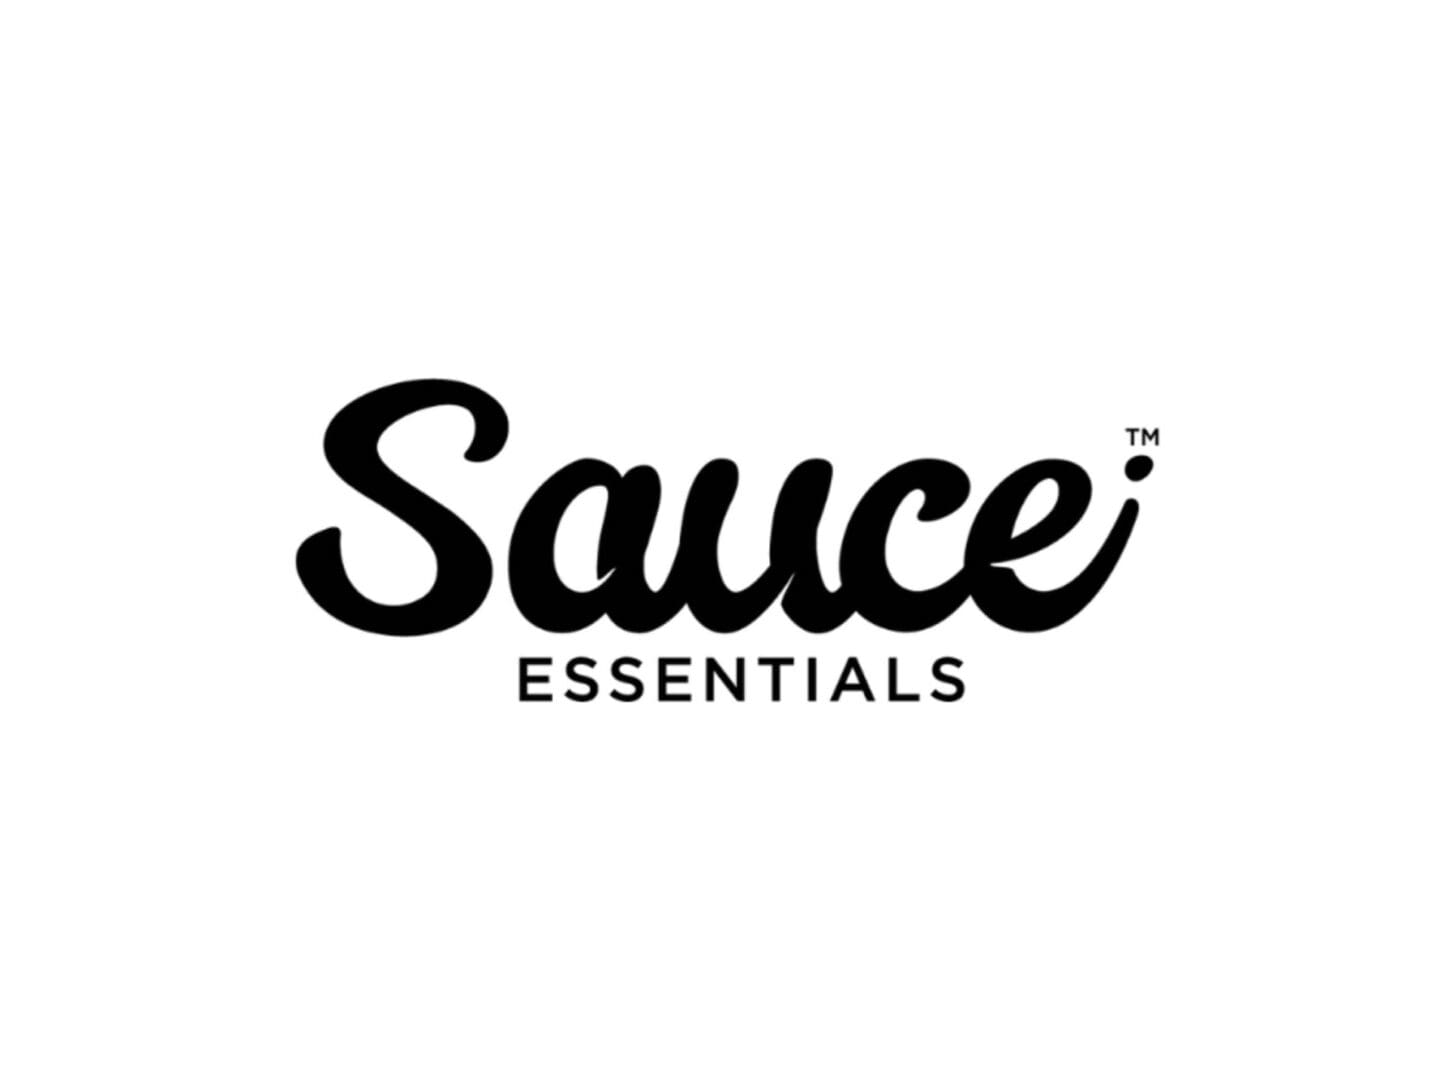 A black and white logo of sauce essentials